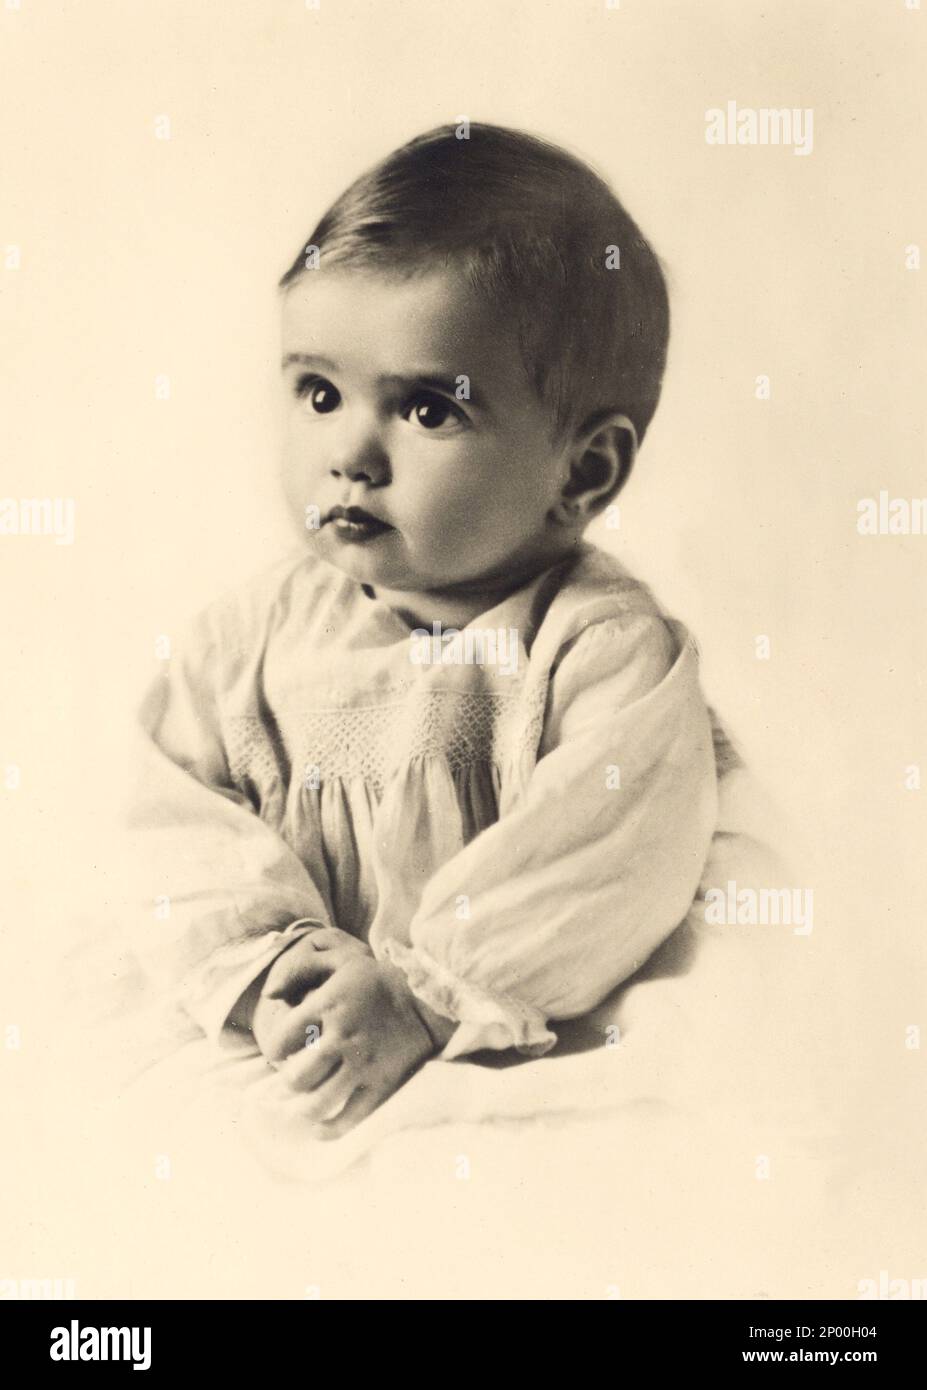 1941 , Rome , Italy : The  princess ELIZABETH Marguerite Elena VON HESSEN ( ELISABETTA , born 8 october 1940 in Rome , Italy ) daugther of italian royal princess MAFALDA di SAVOIA ( Roma 19 november 1902 - Buchenwald concentration camp 27 august 1944 ) and the german prince Philipp of HESSE Kassel ( 1896 - 1980 ) . Married the day 26 february 1962 in Frankfurt Am Main , Hessen , with the Count Friederich Carl VON OPPERSDORF ( 1925 - 1985 ) - royalty - nobili italiani - nobiltà - principessa reale - ITALIA - portrait - ritratto - Filippo d' ASSIA - personality celebrity personalities celebritie Stock Photo